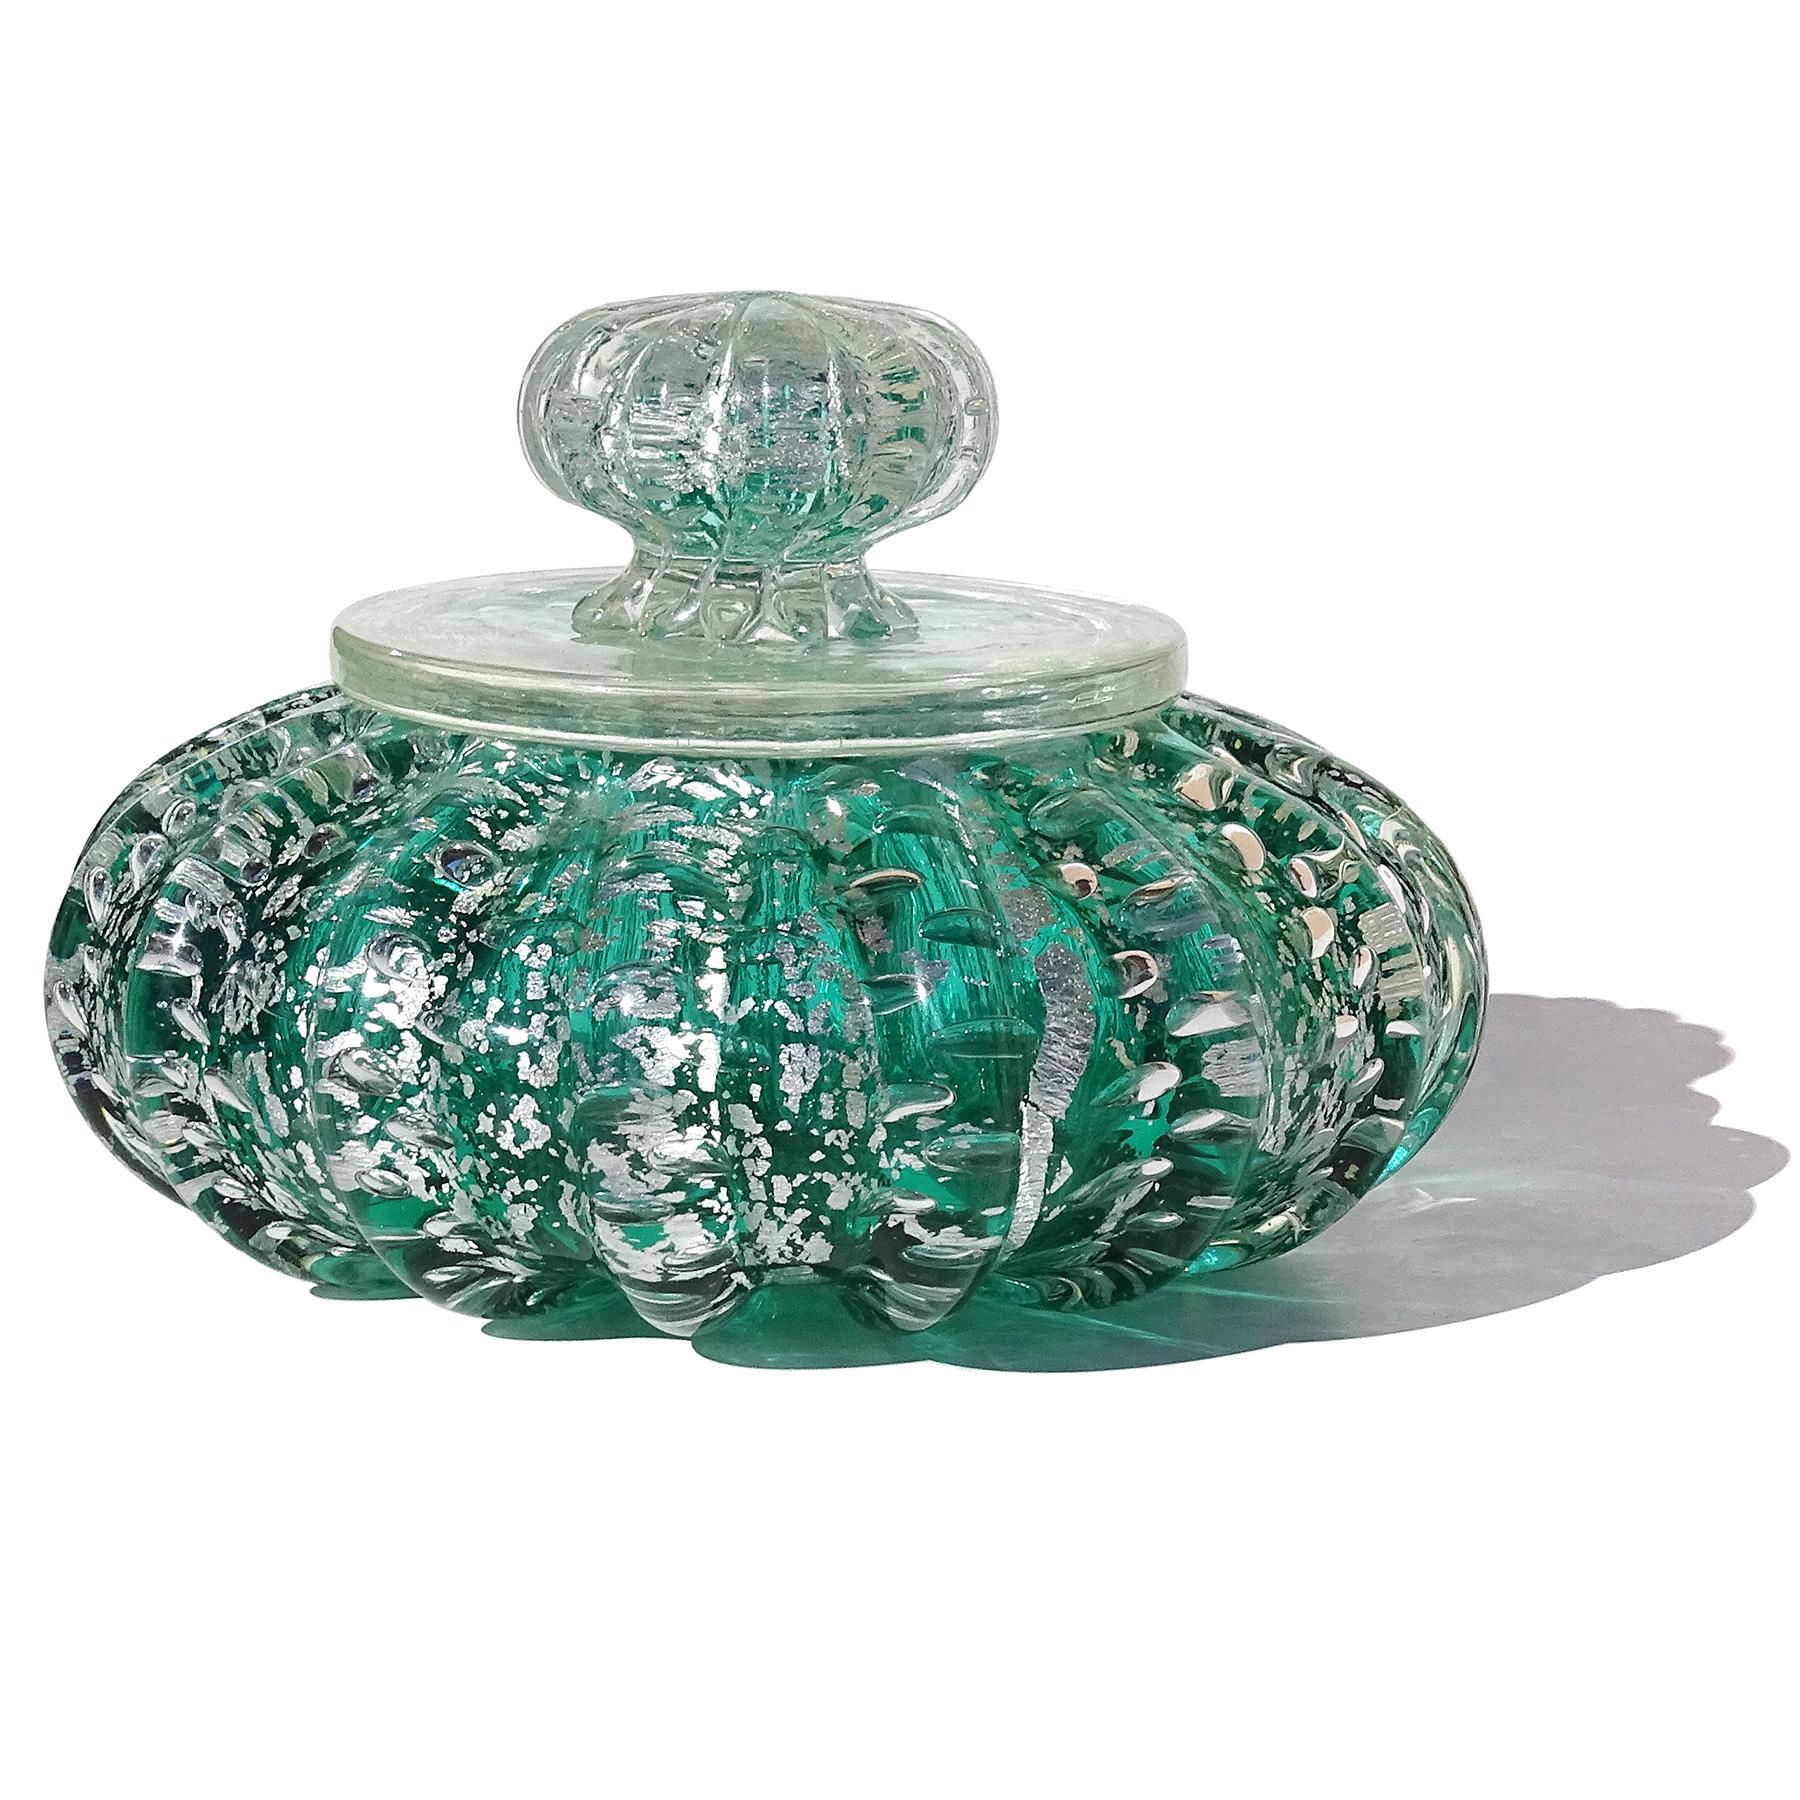 Beautiful and large, vintage Murano hand blown Sommerso green, silver flecks and controlled bubbles Italian art glass powder or jewelry box. Created in the manner of the Barovier e Toso company. The lidded jar has a ribbed surface, with 